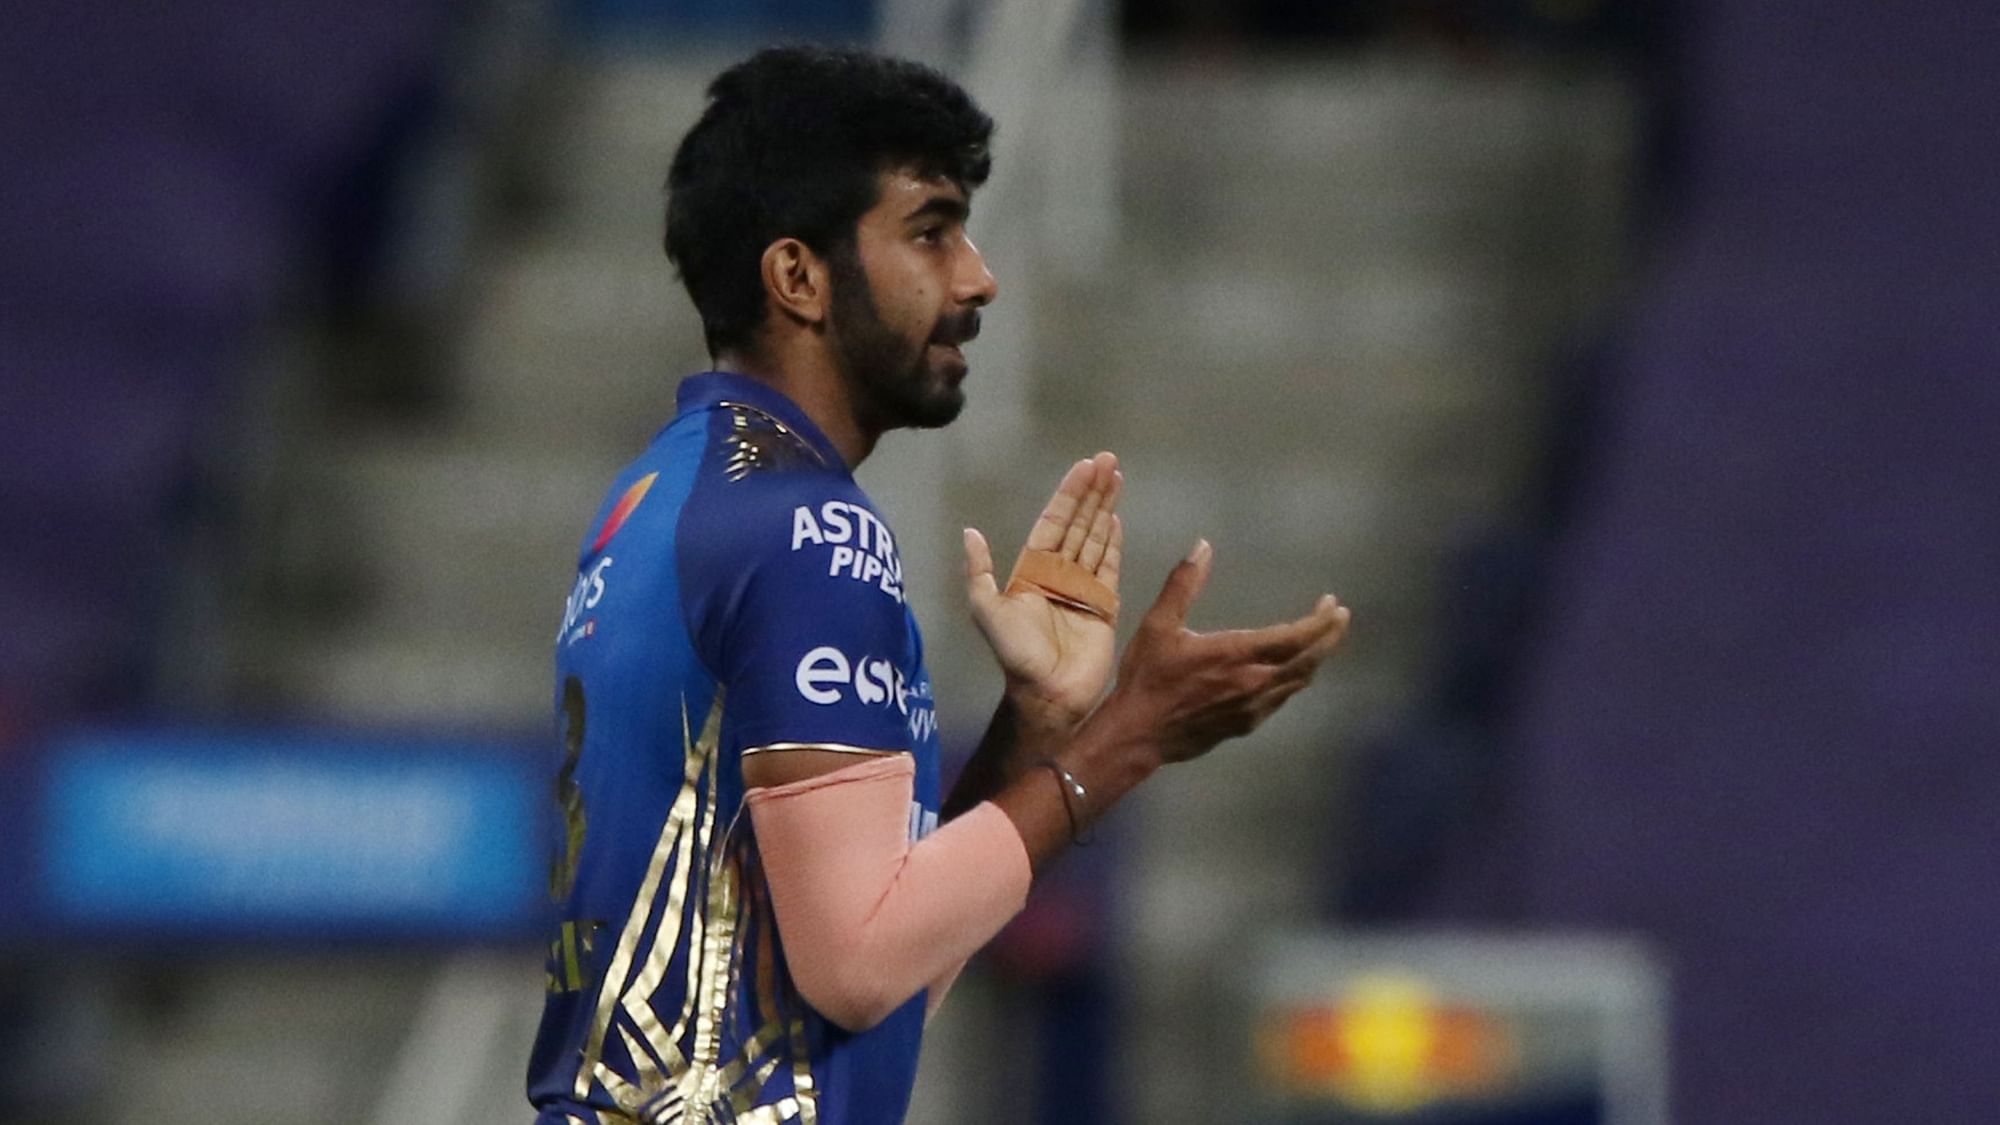 Jasprit Bumrah finished with 3/14 as RCB were restricted to 164/6.